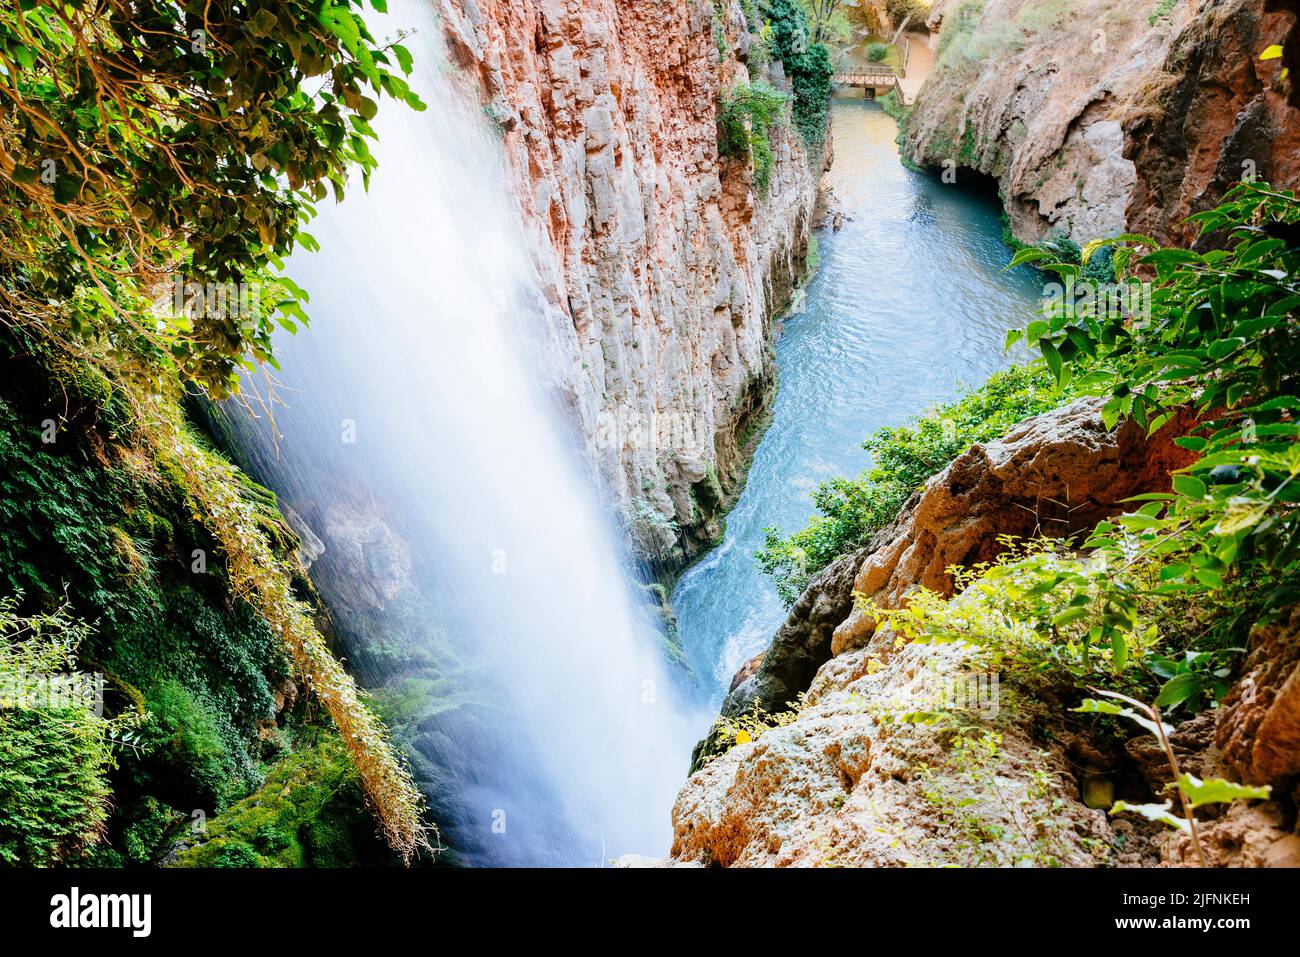 The waterfall called 'Cola de Caballo - Horsetail' with more than 50 meters is the highest in the Natural Park of the Monasterio de Piedra - Stone Mon Stock Photo